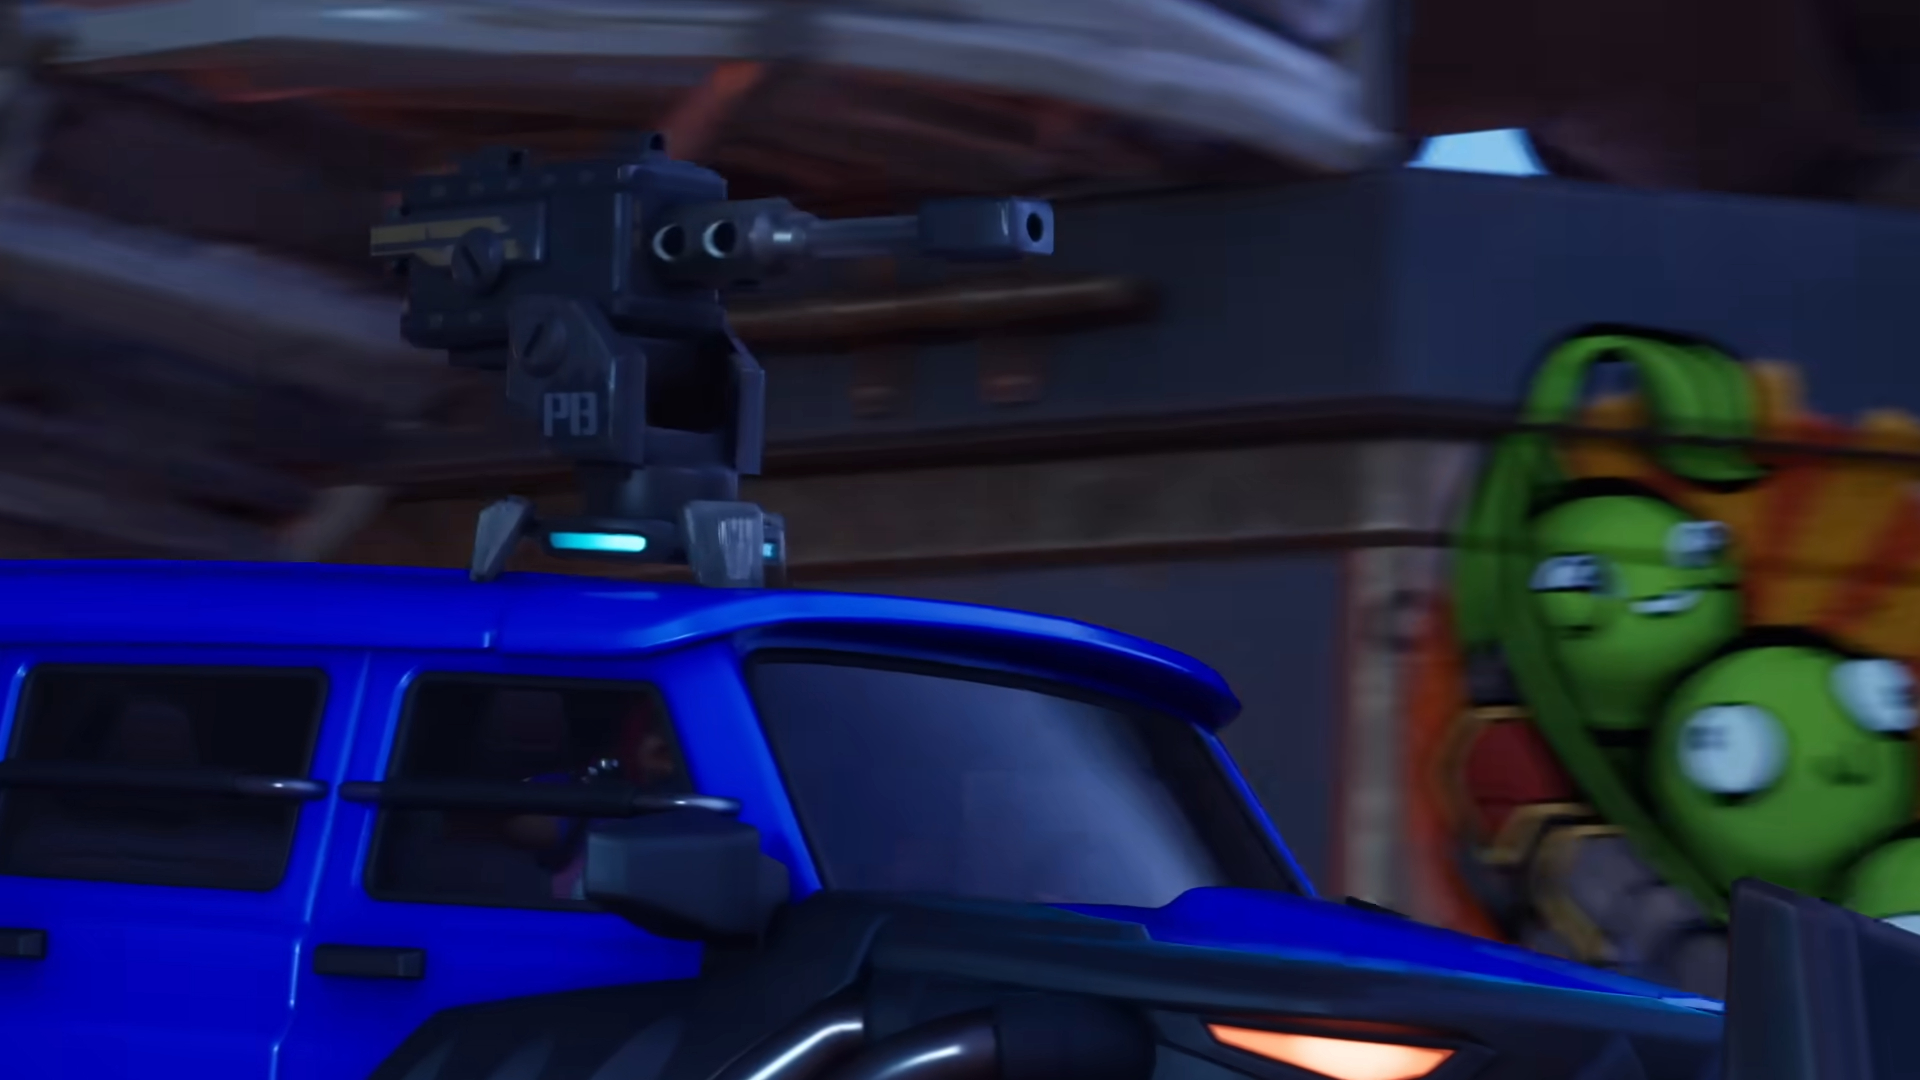 A fortnite car with a turret on the roof.